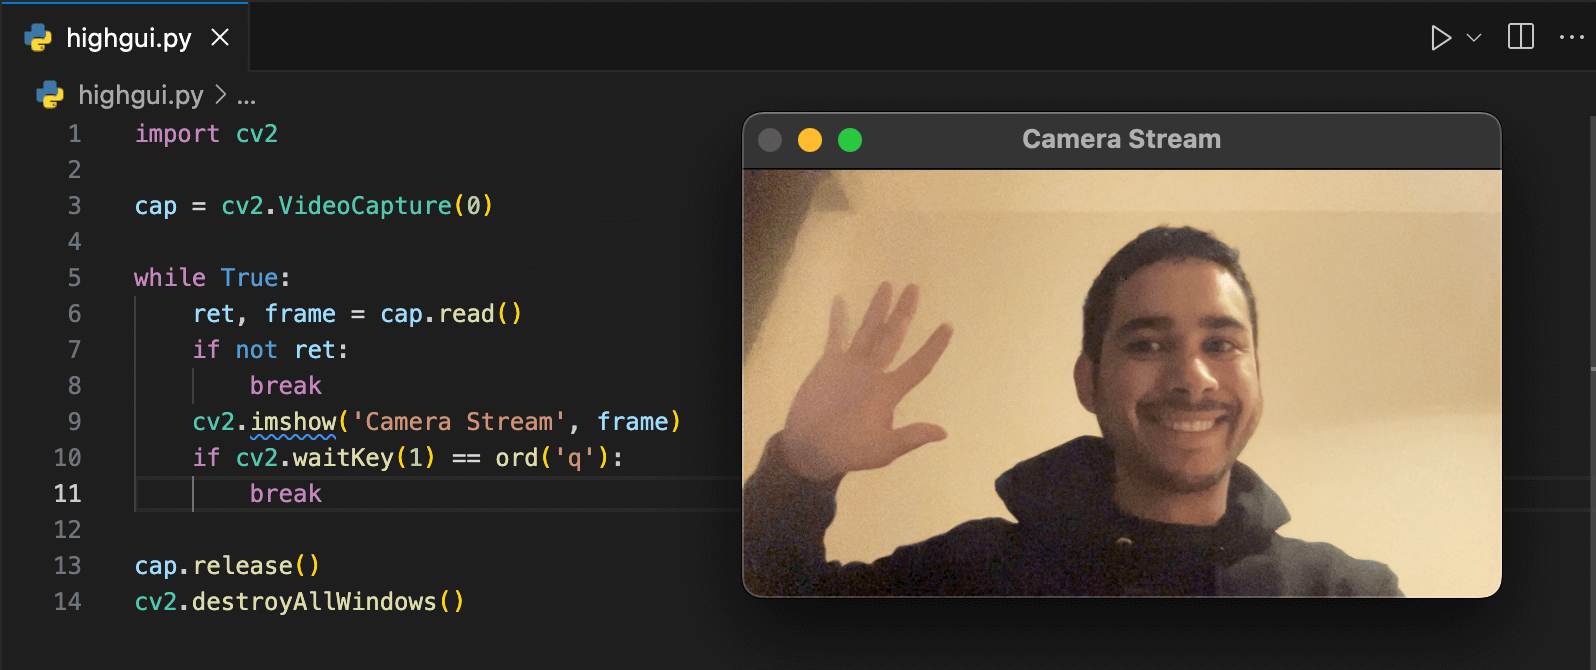 A simple webcam streaming application using OpenCV and HighGUI.